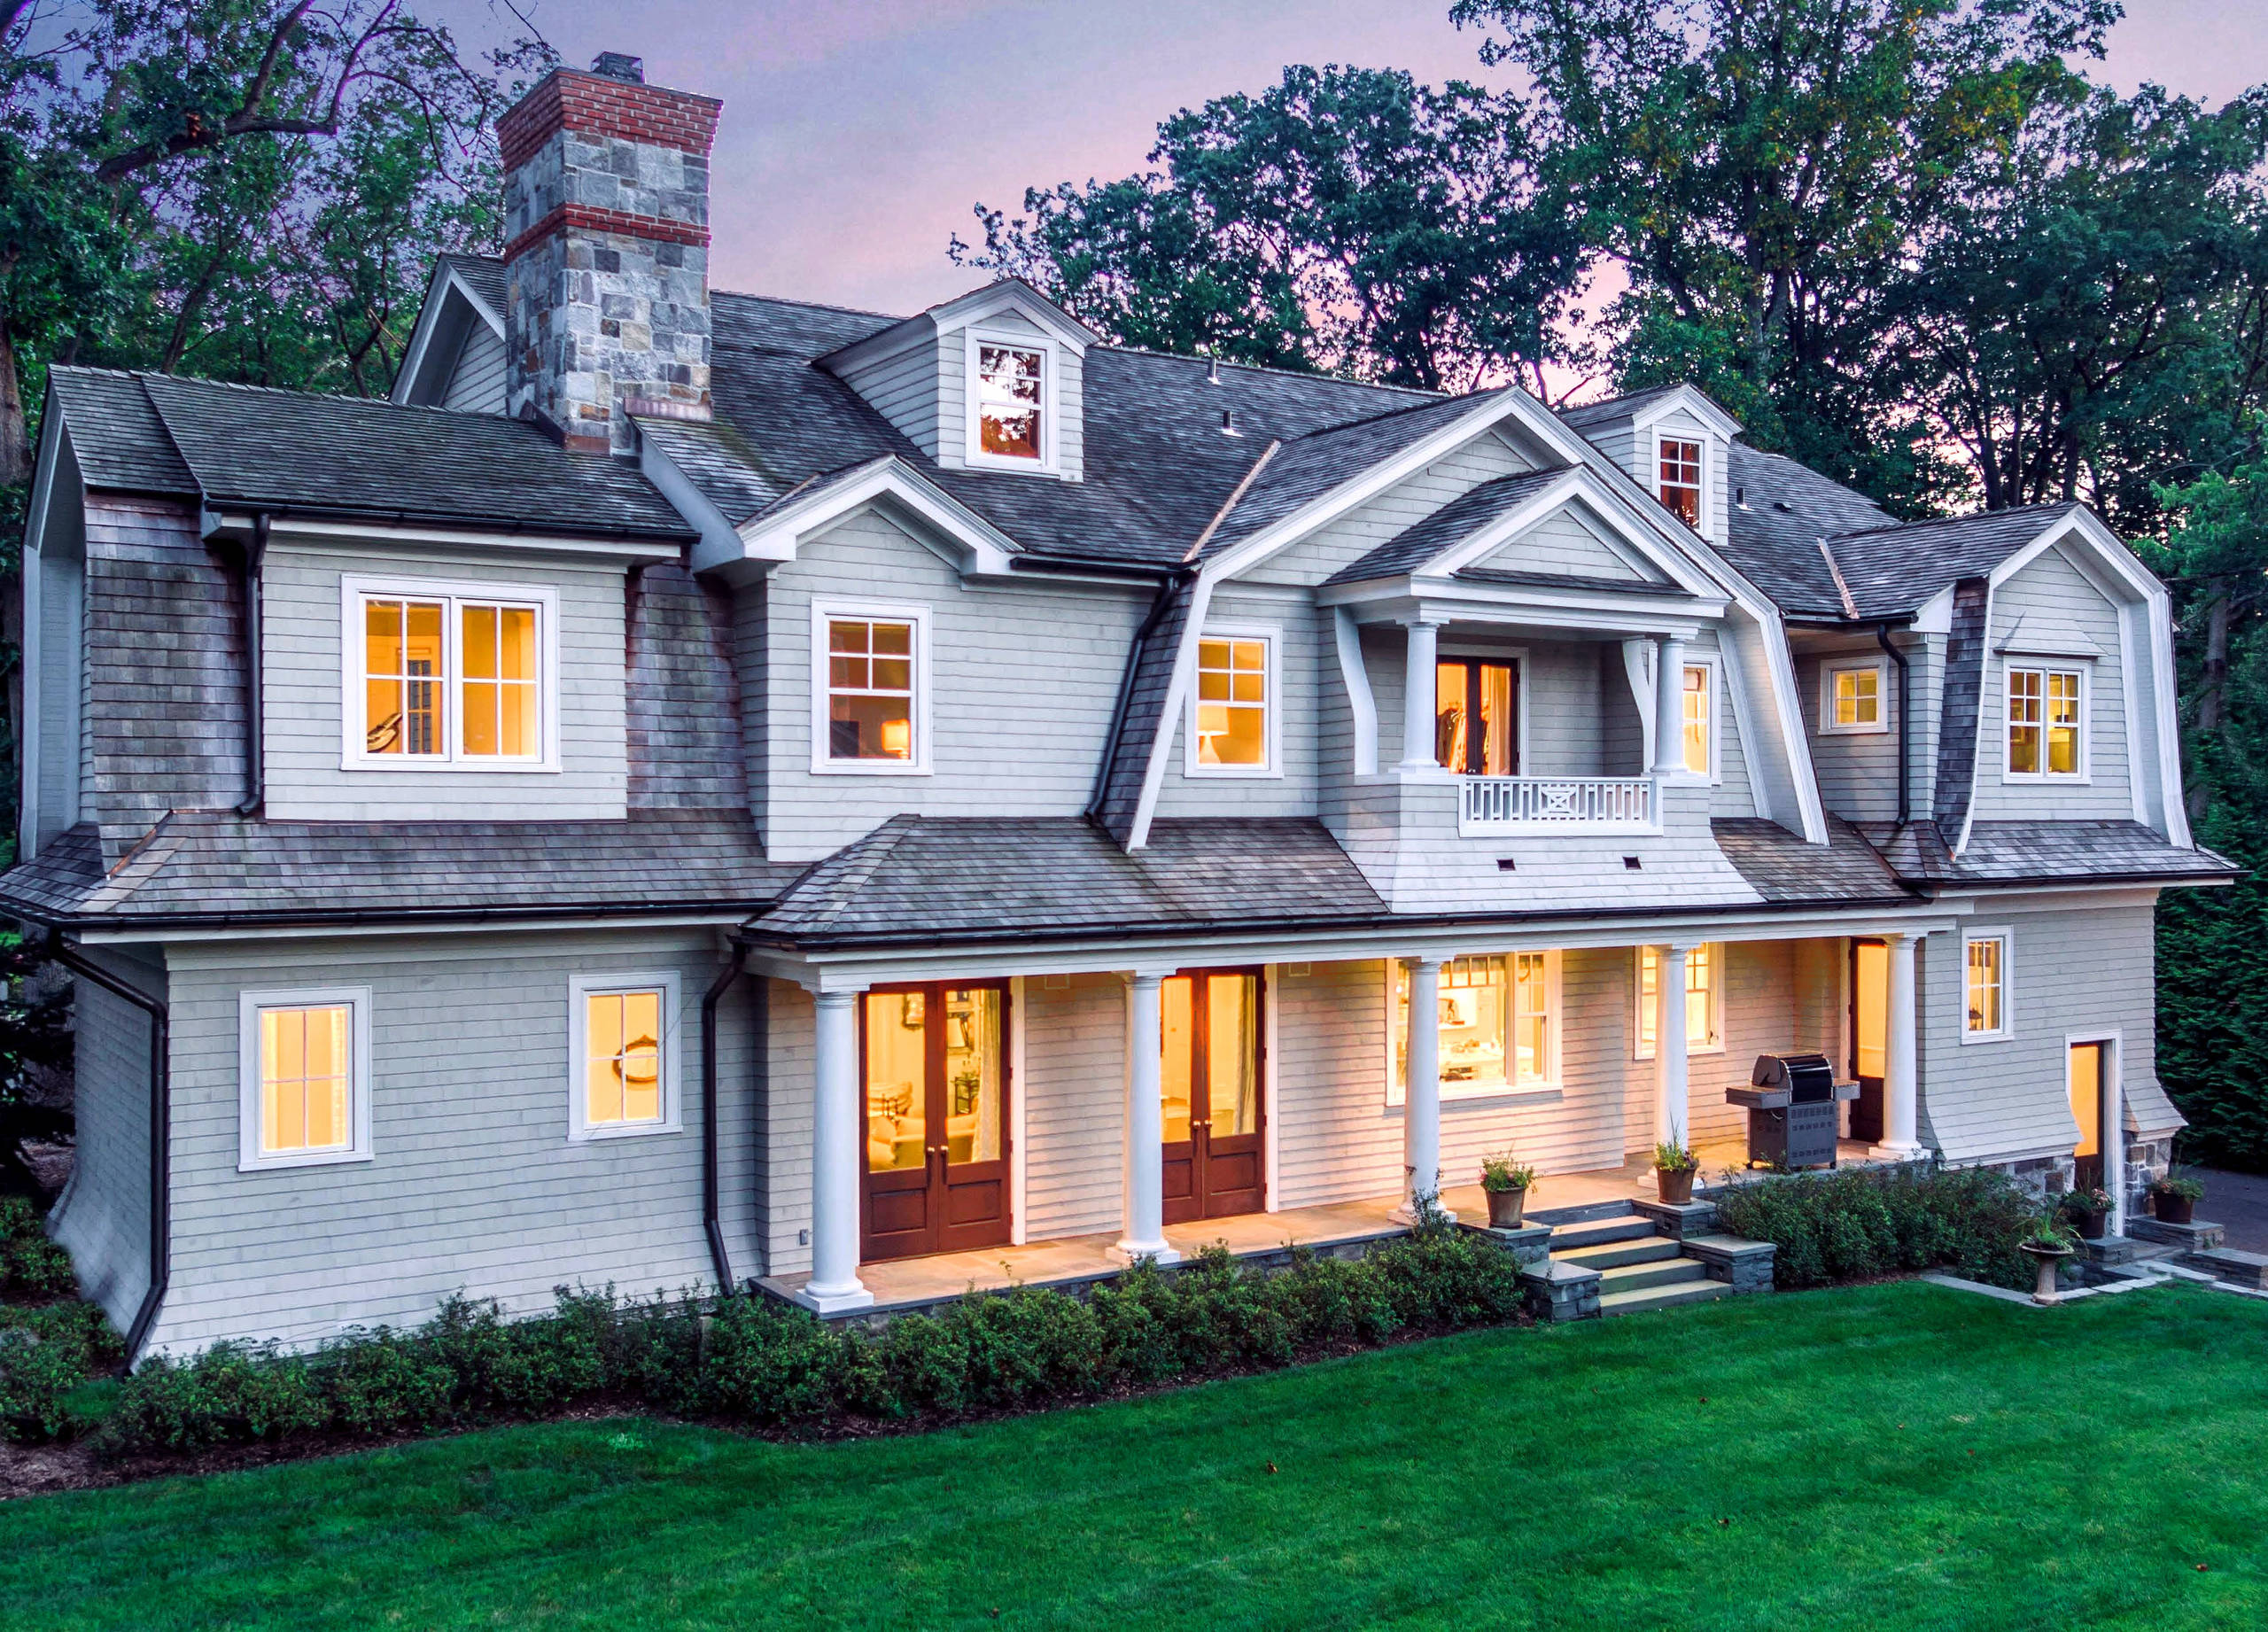 Private Shingle Style Residence in Haworth, NJ